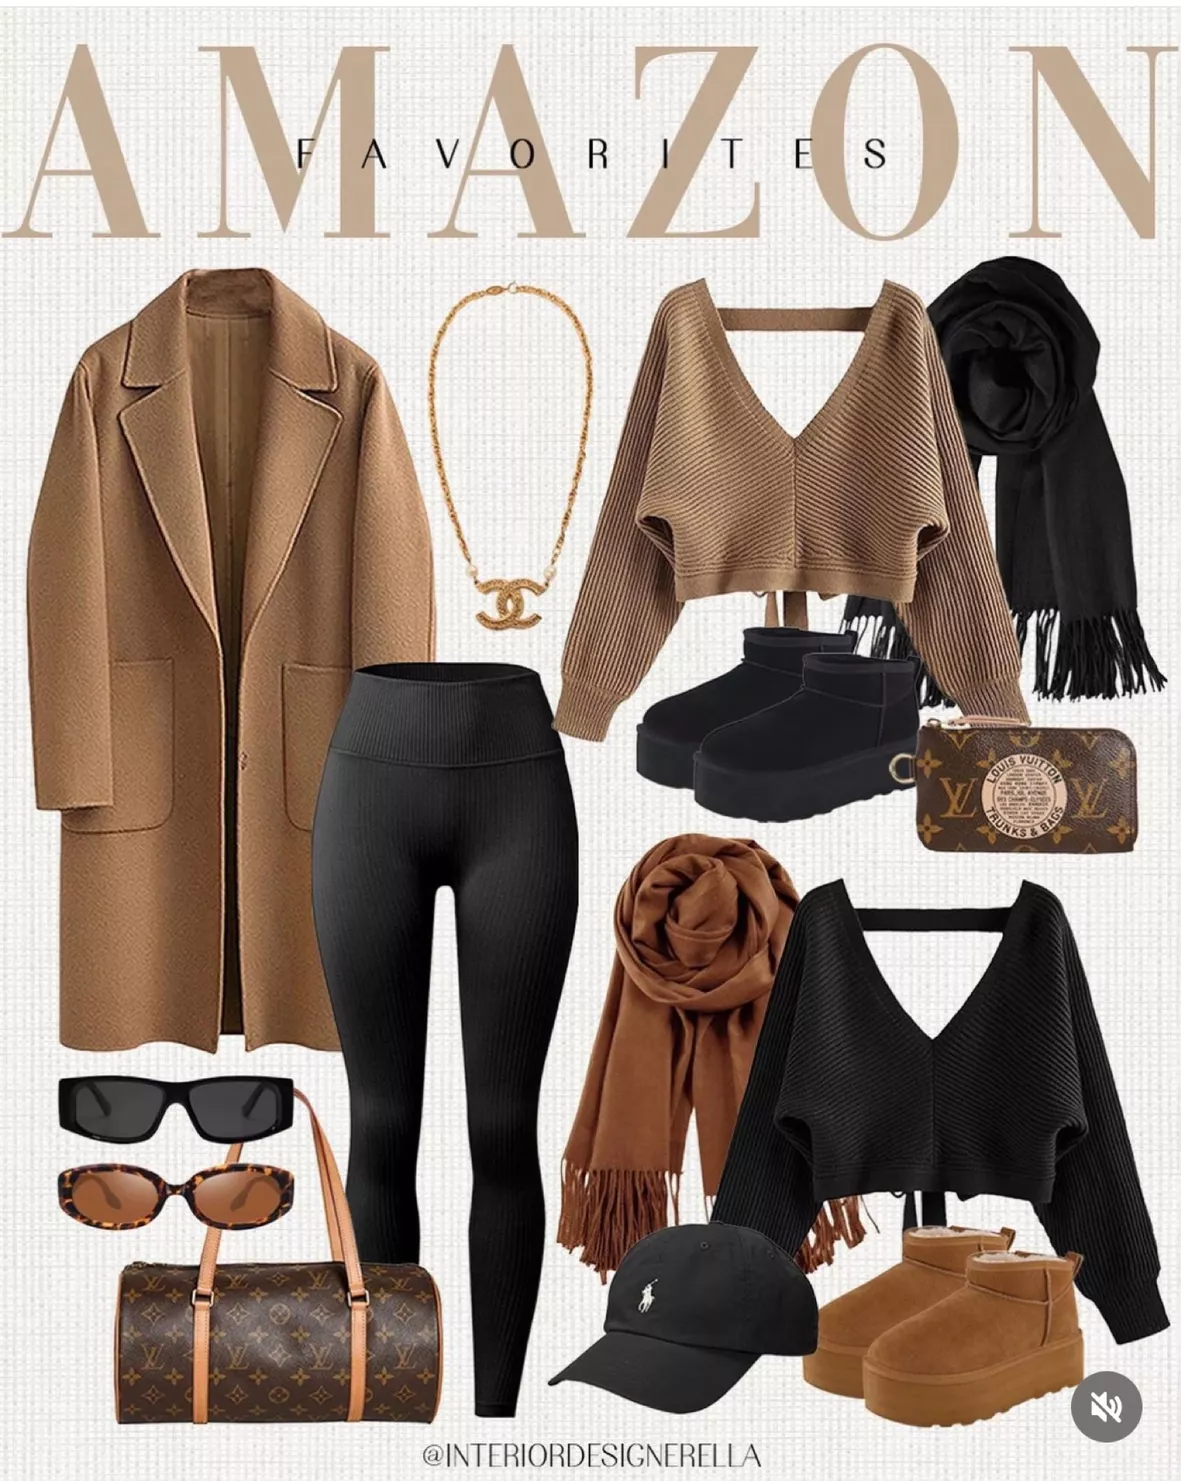 Louis Vuitton Outfits Polyvore